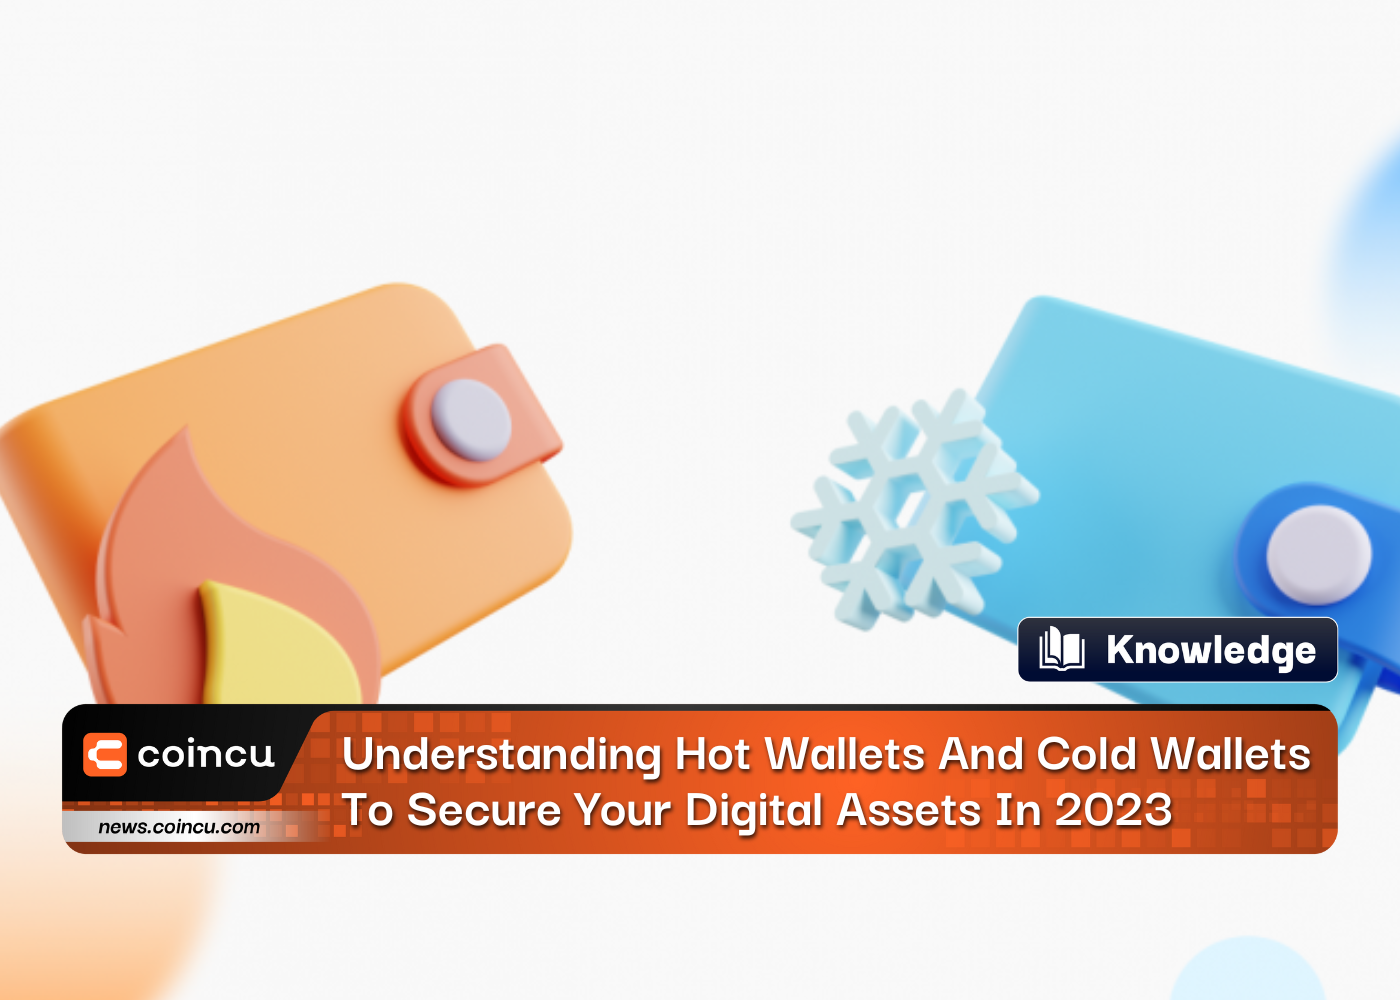 Understanding Hot Wallets And Cold Wallets To Secure Your Digital Assets In 2023